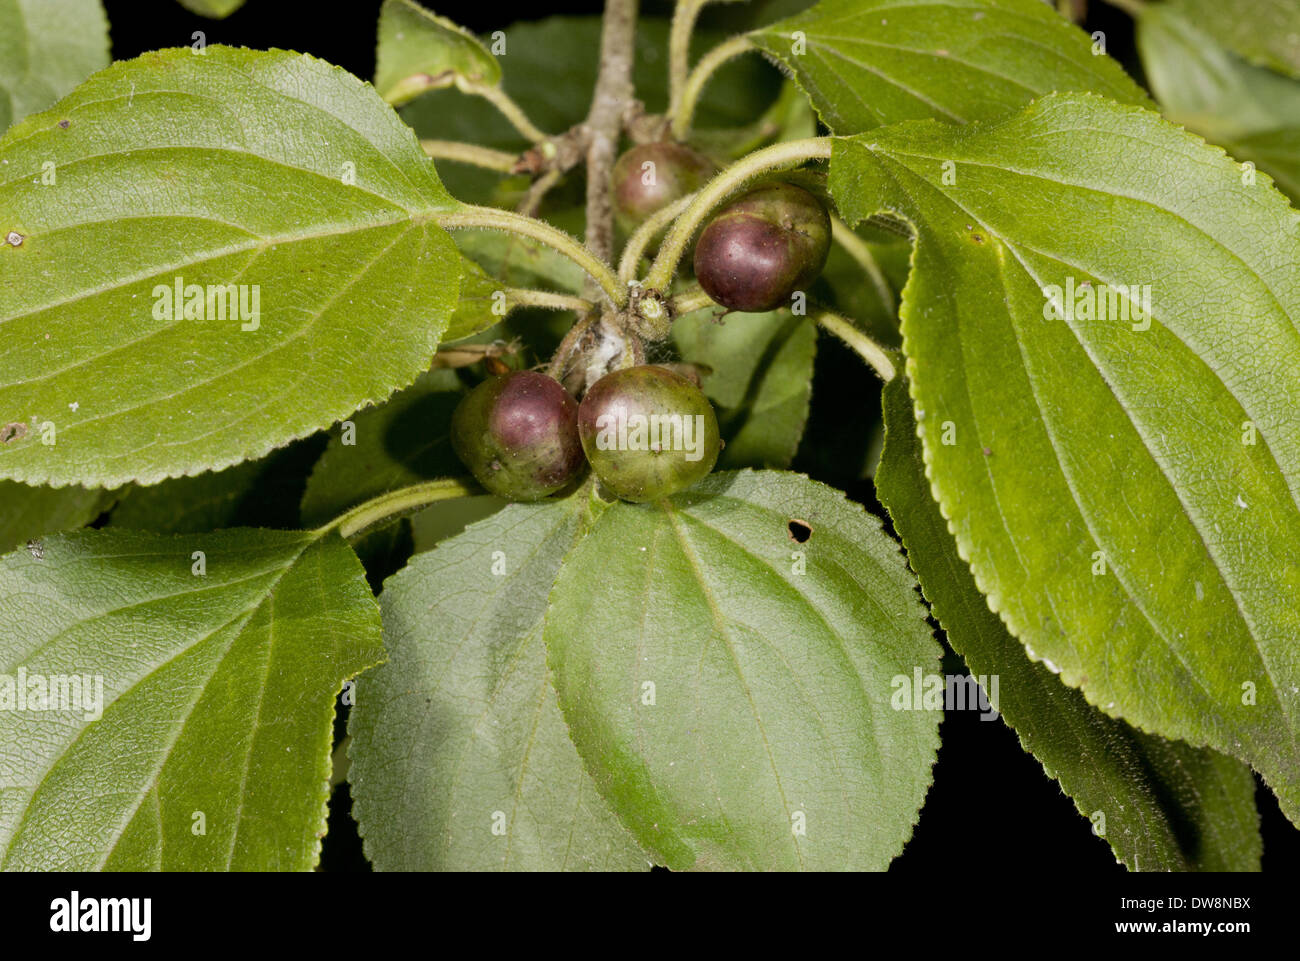 Common Buckthorn (Rhamnus cathartica) close-up of ripening fruit France August Stock Photo